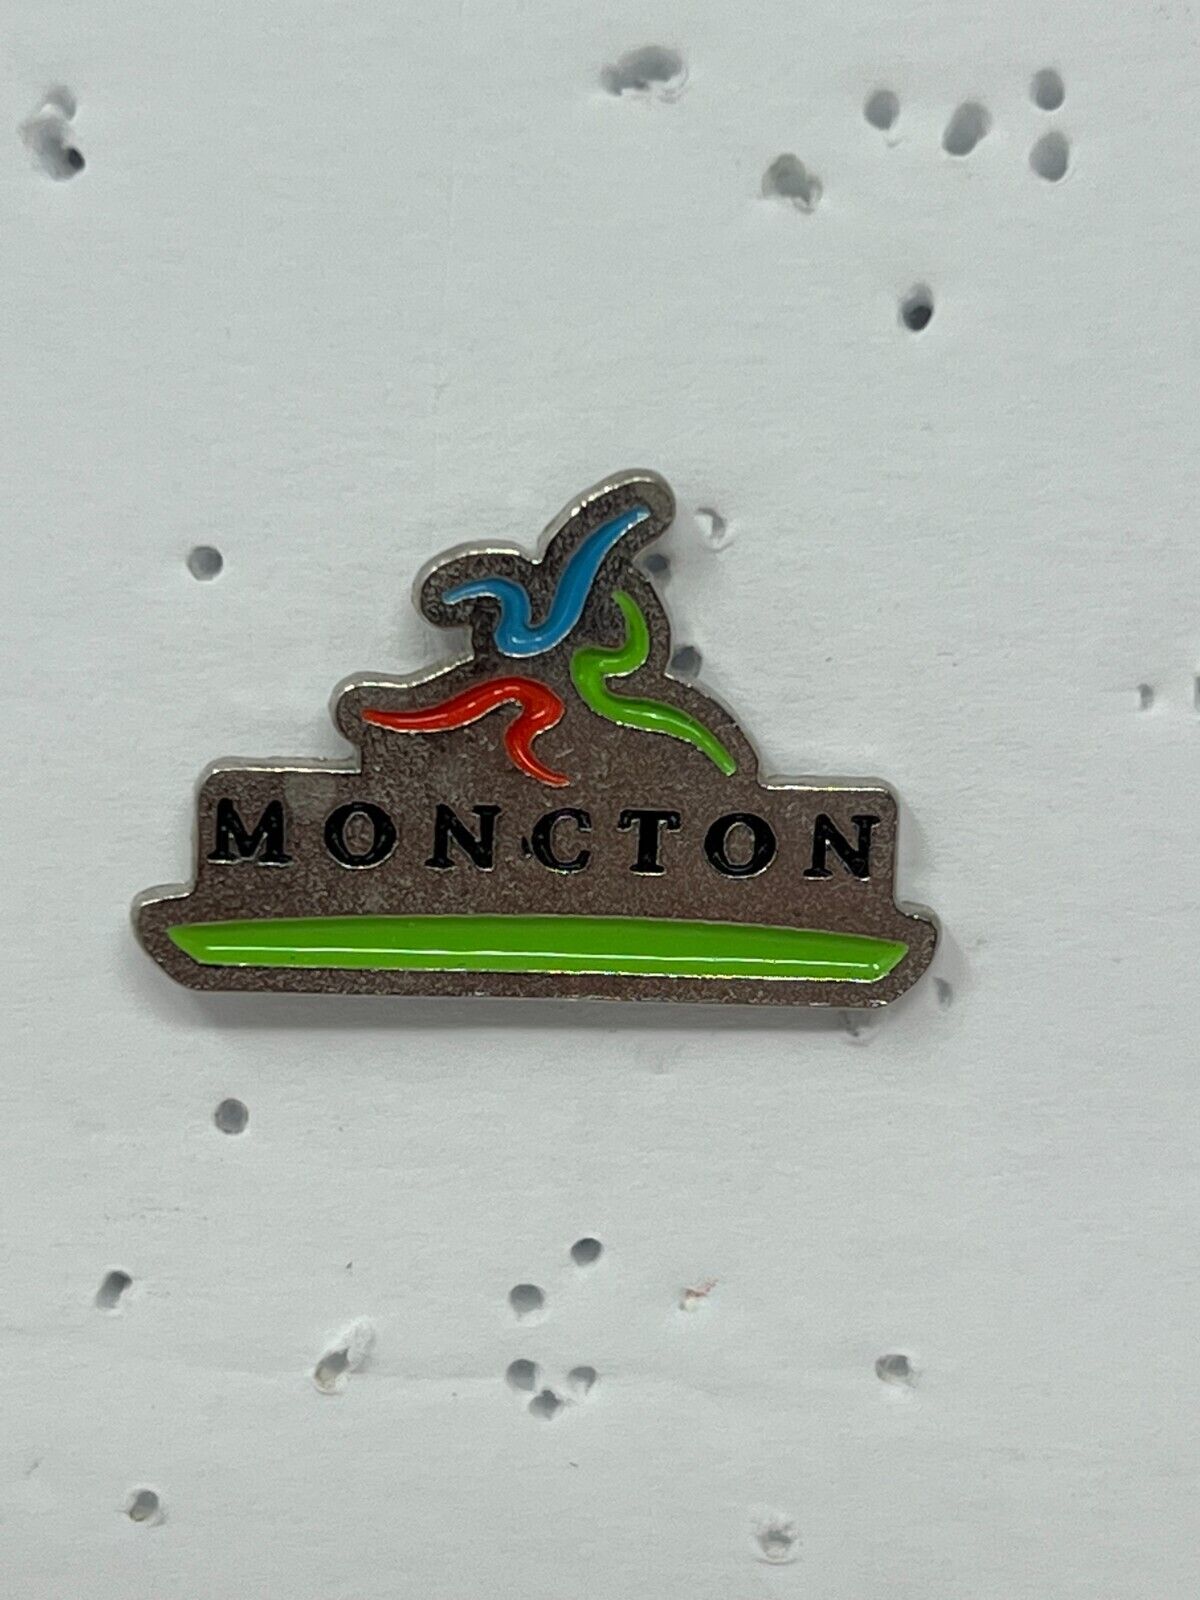 The City of Moncton N.B. Cities & States Lapel Pin P2